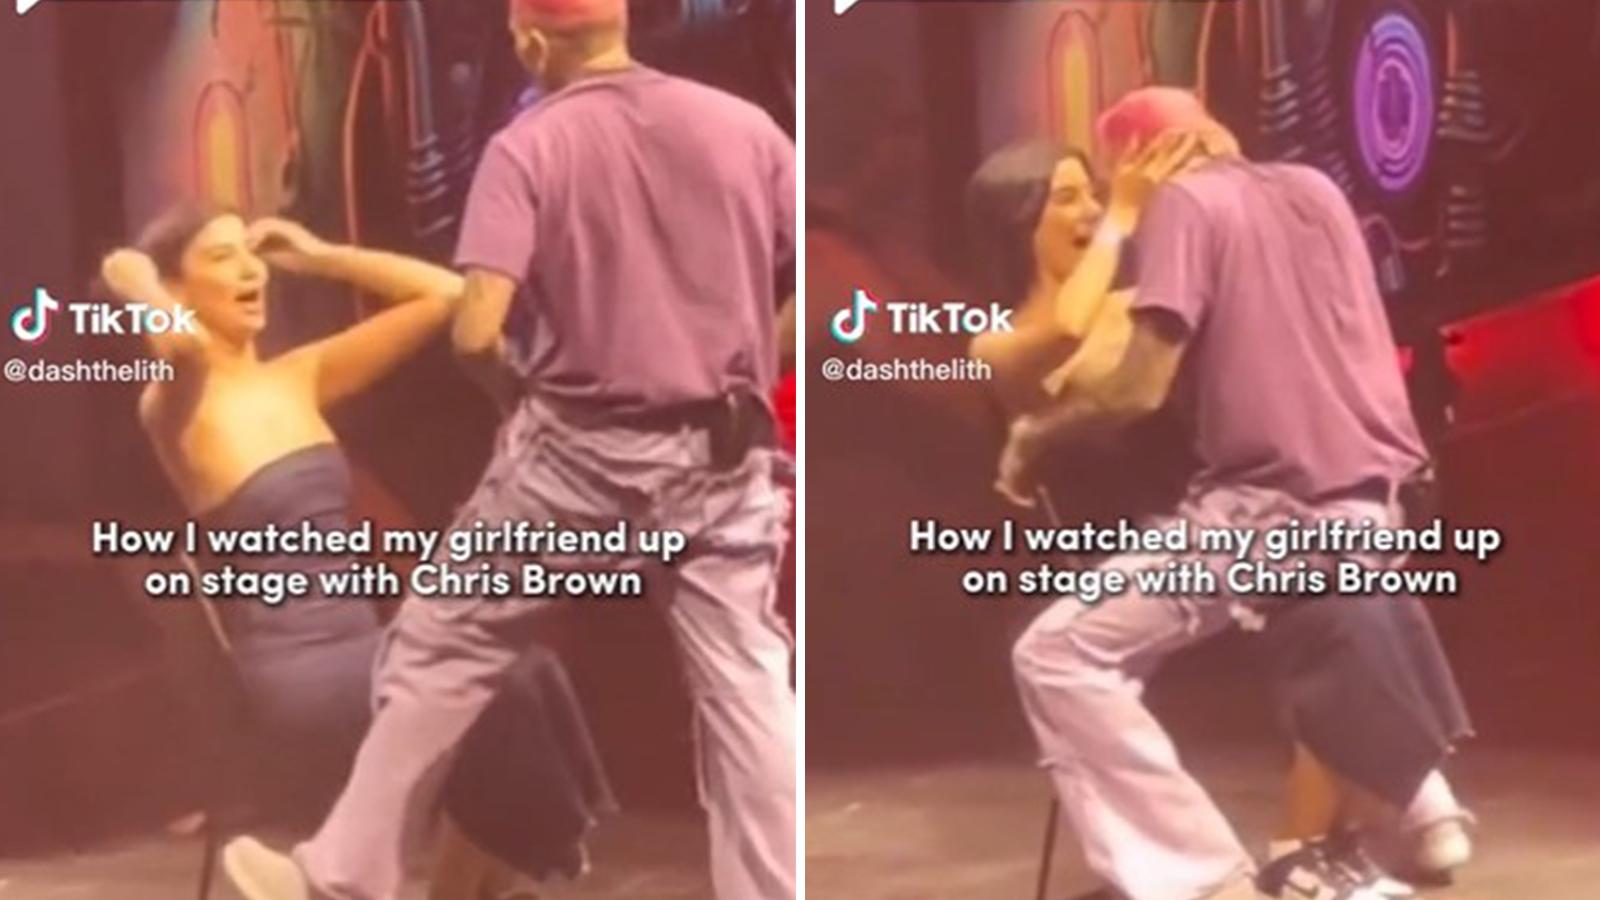 man breaks up with girlfriend for getting lapdance from chris brown